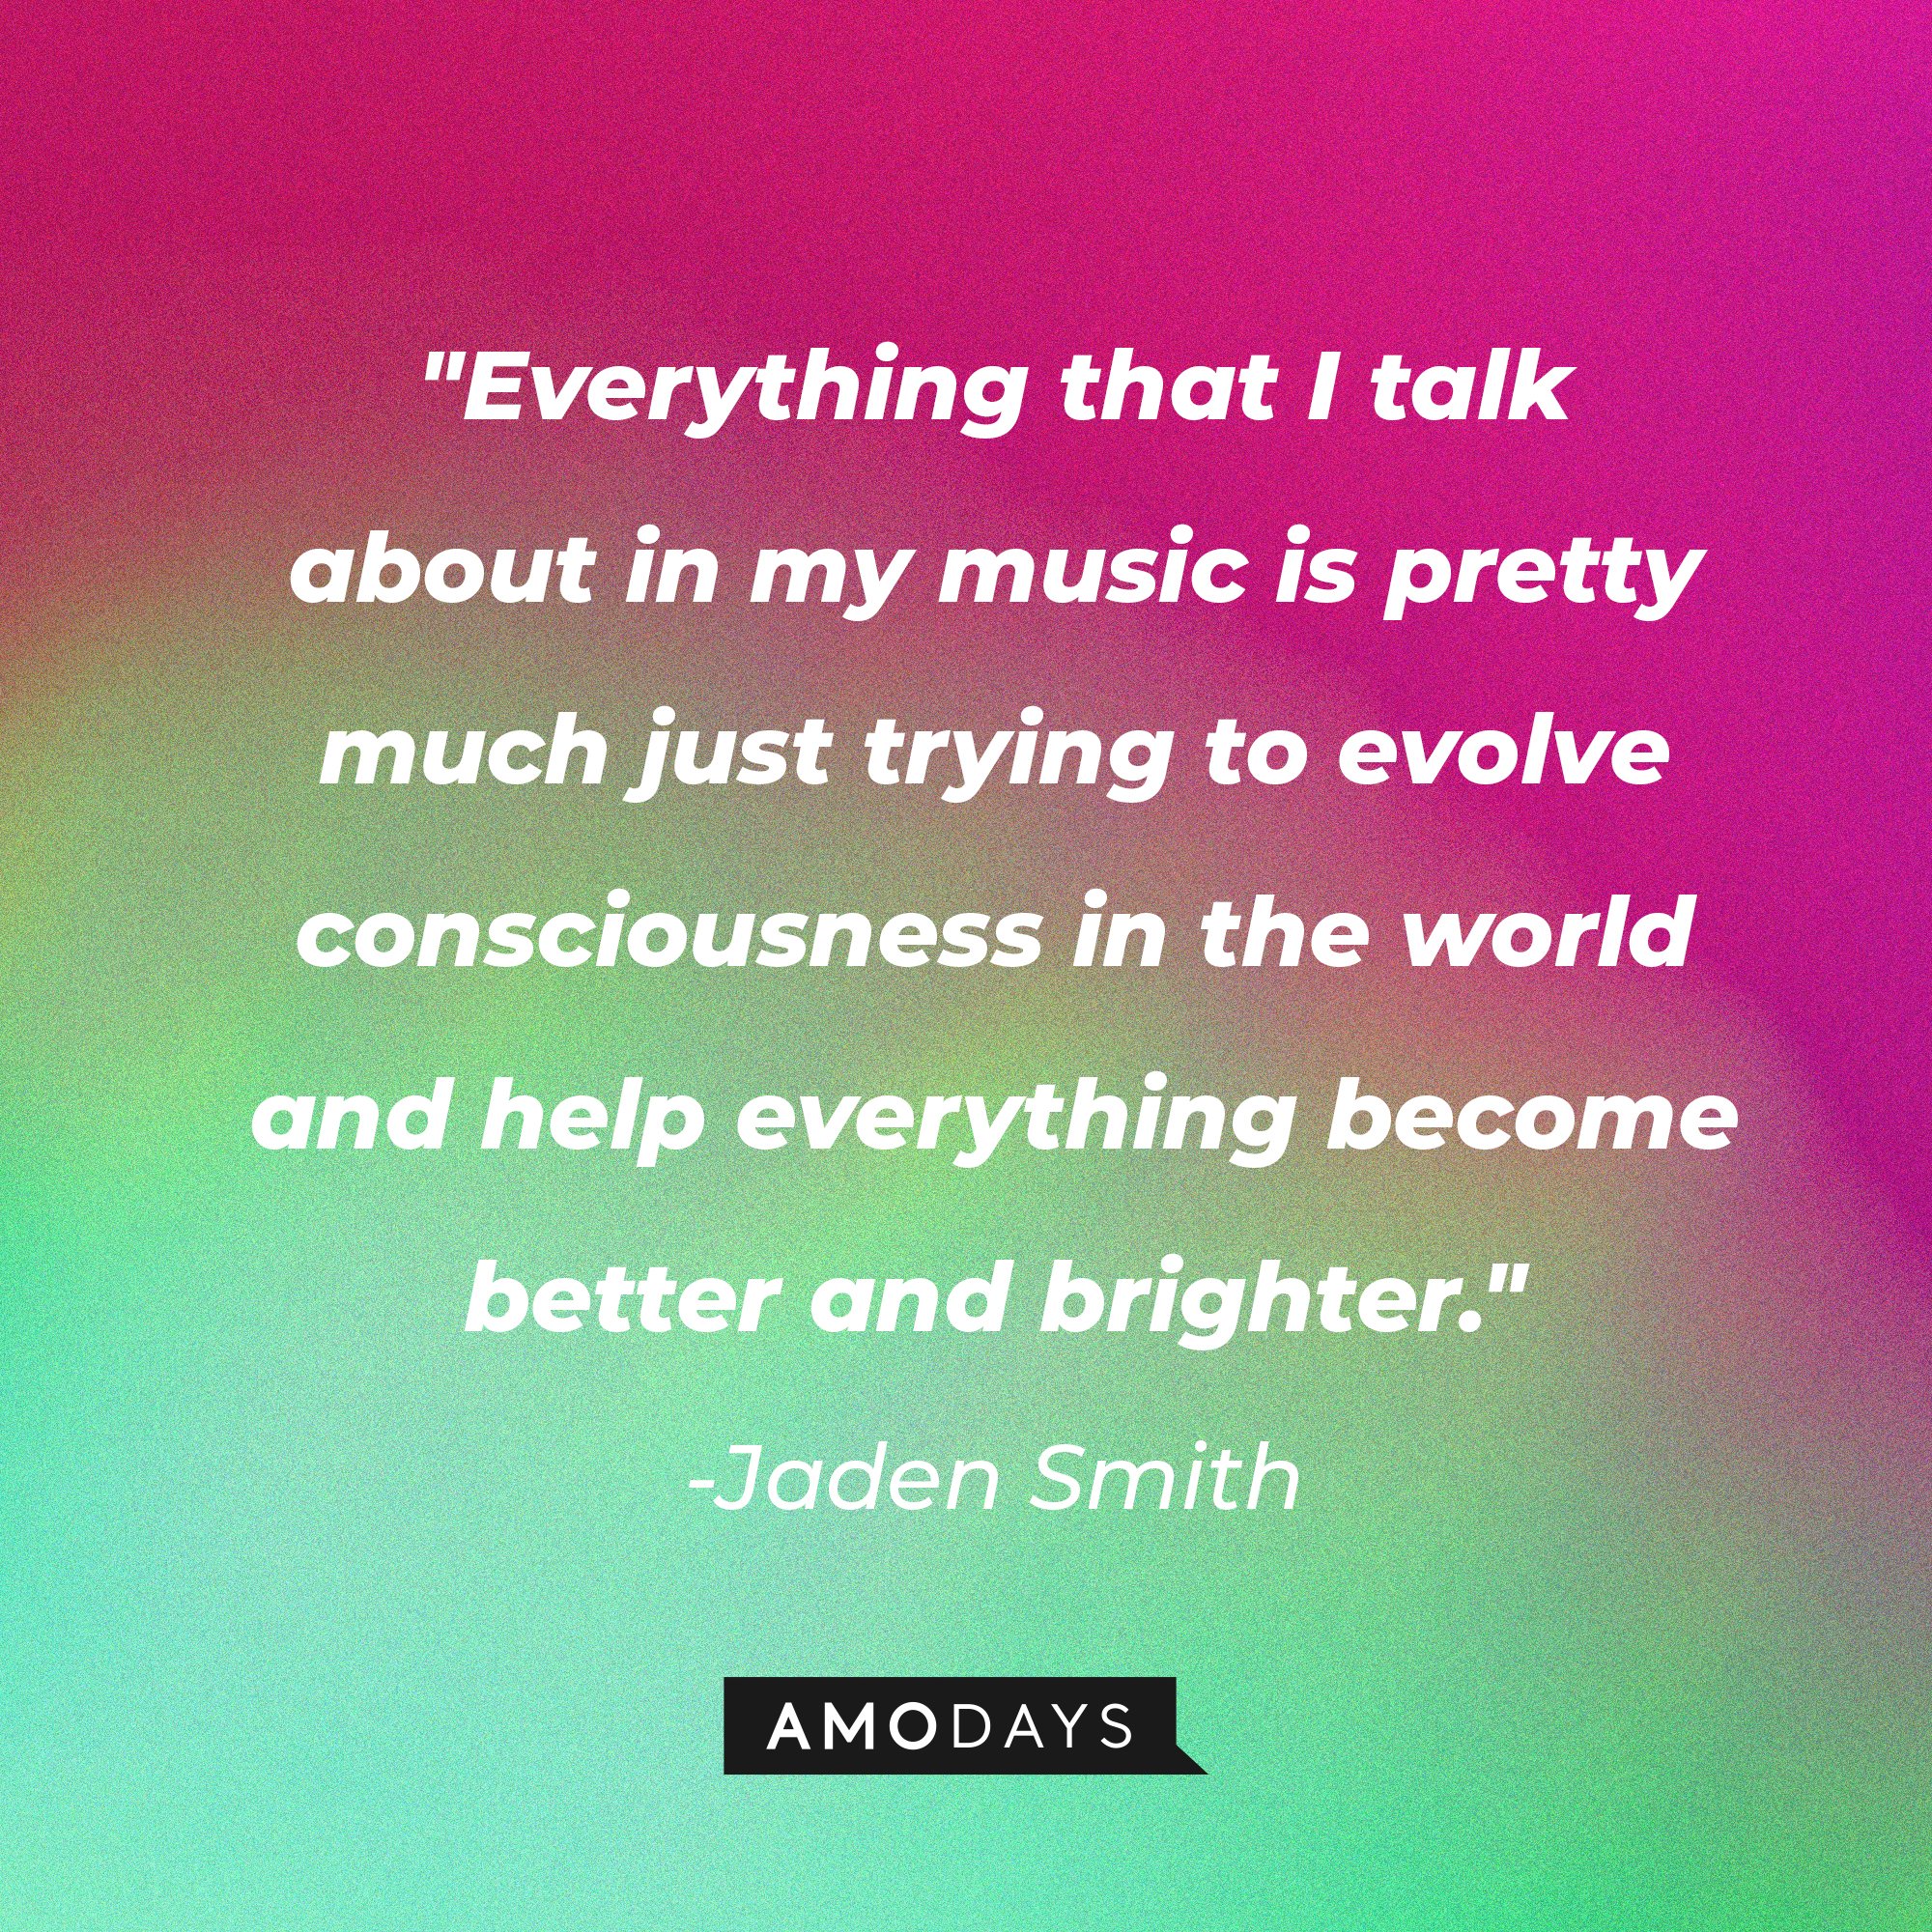 Jaden Smith's quote: "Everything that I talk about in my music is pretty much just trying to evolve consciousness in the world and help everything become better and brighter." | Image: AmoDays